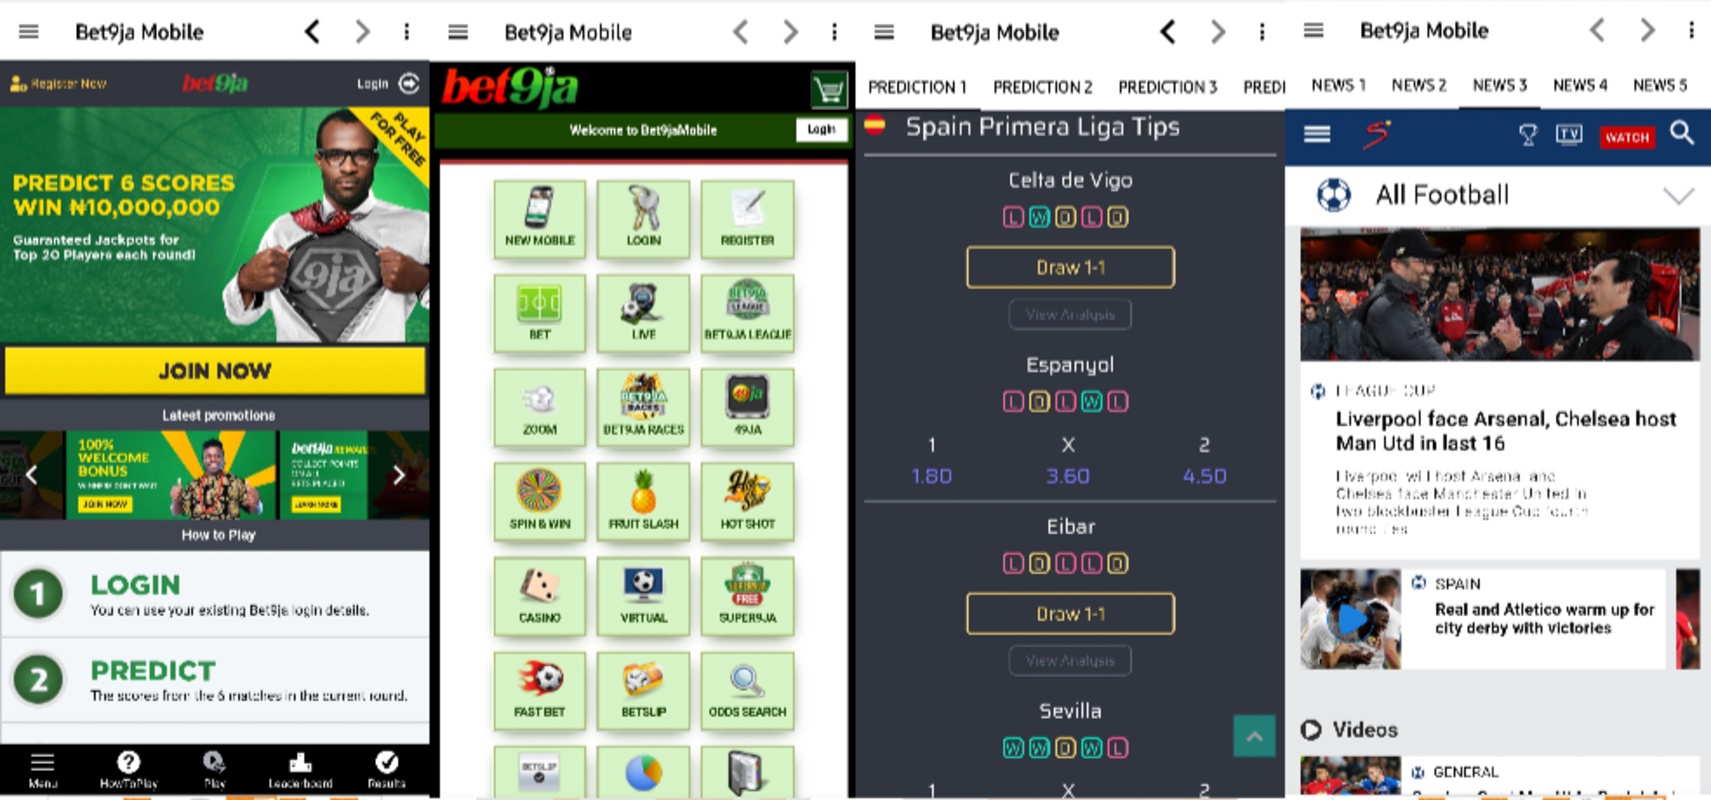 Bet9ja Mobile 81.02.22 APK for Android Screenshot 1